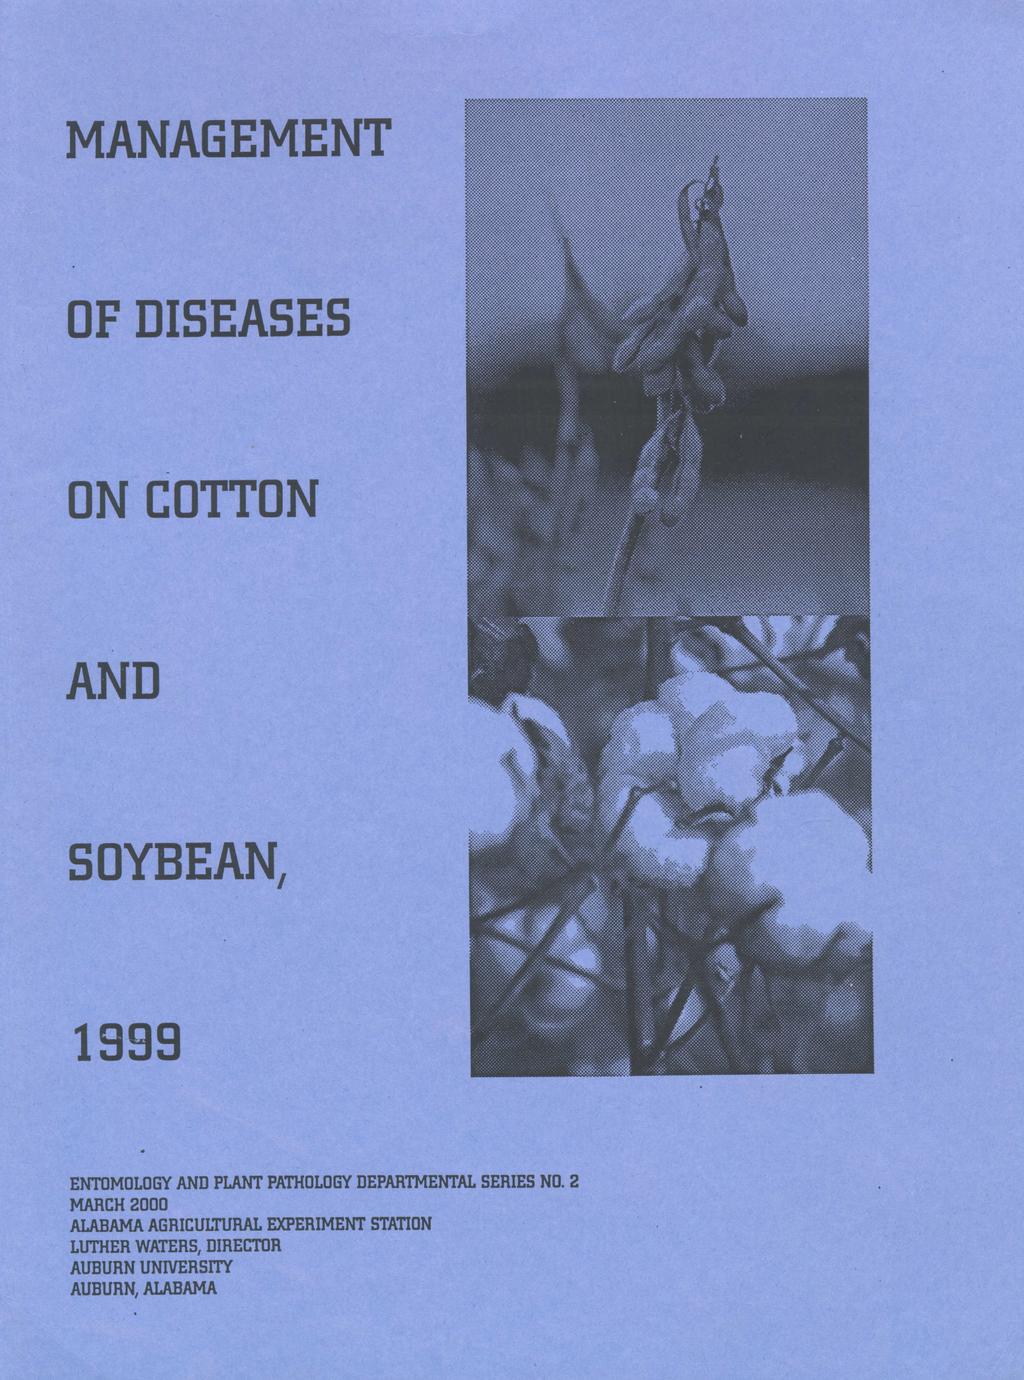 MANAGEMENT OF DISEASES ON COTTON AND SOYBEAN, 1999 ENTOMOLOGY AND PLANT PATHOLOGY DEPARTMENTAL SERIES NO.